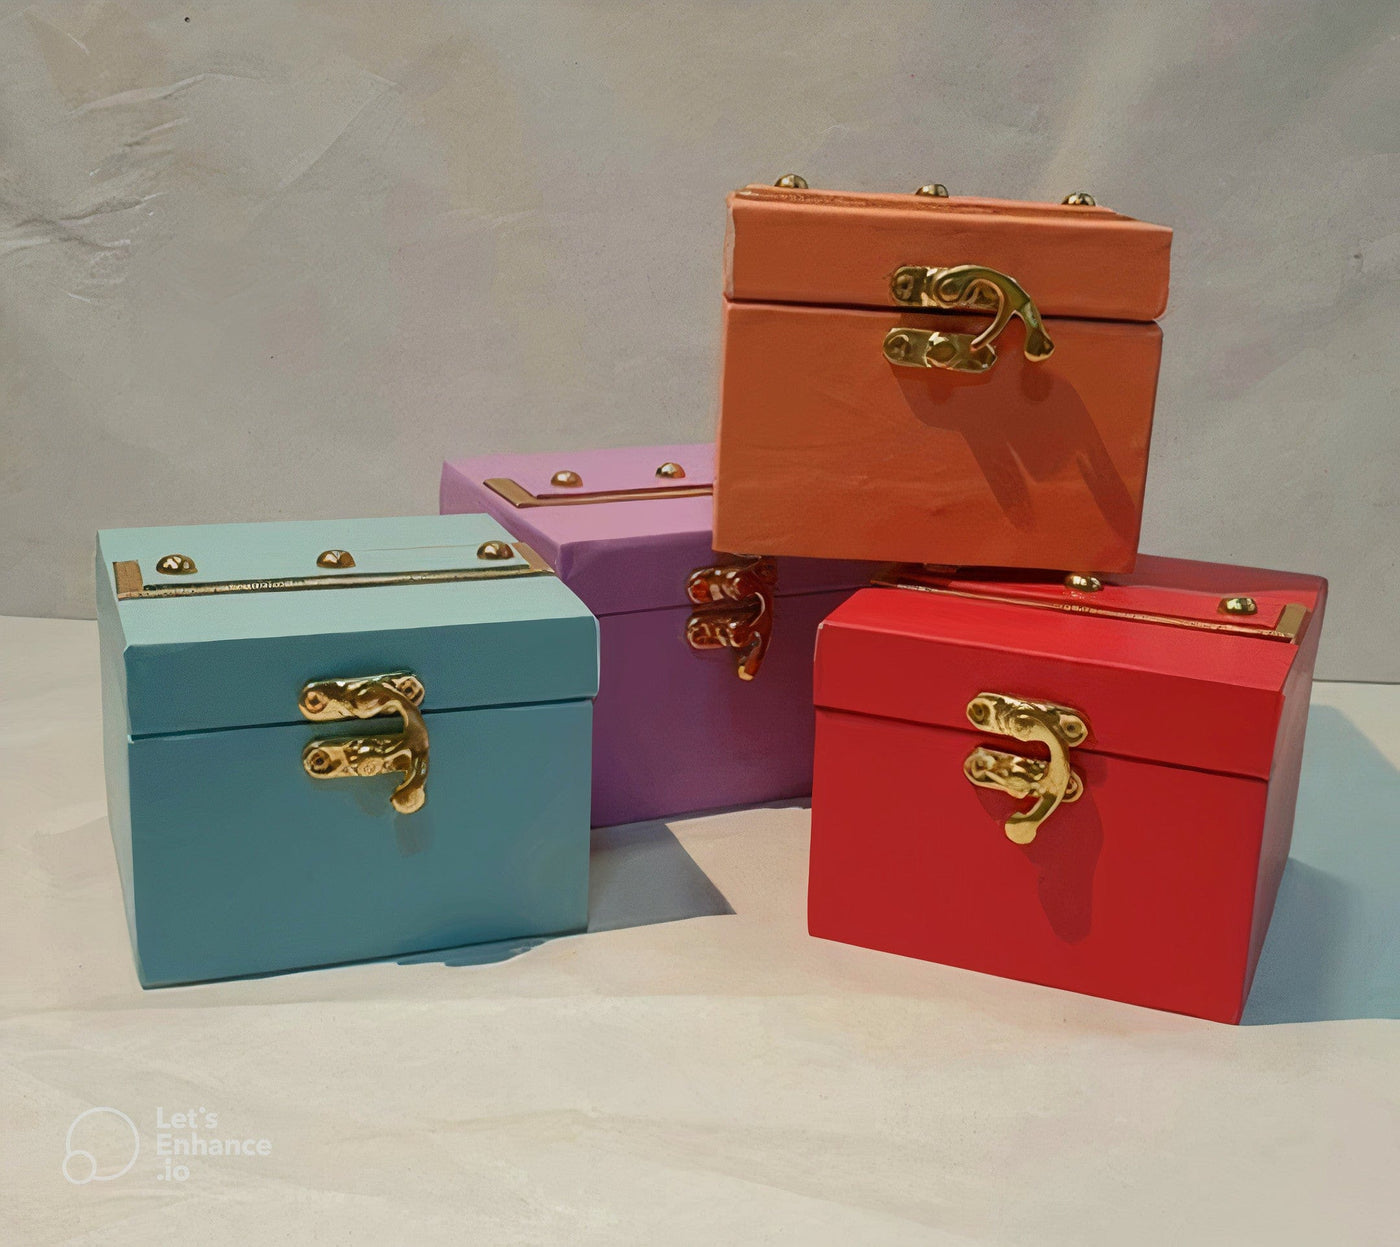 Lamansh leatherite boxes LAMANSH® ( 4*4 inch ) Leather mini trunk boxes for gifting 🎁 / small leatherite lock boxes for wedding favors